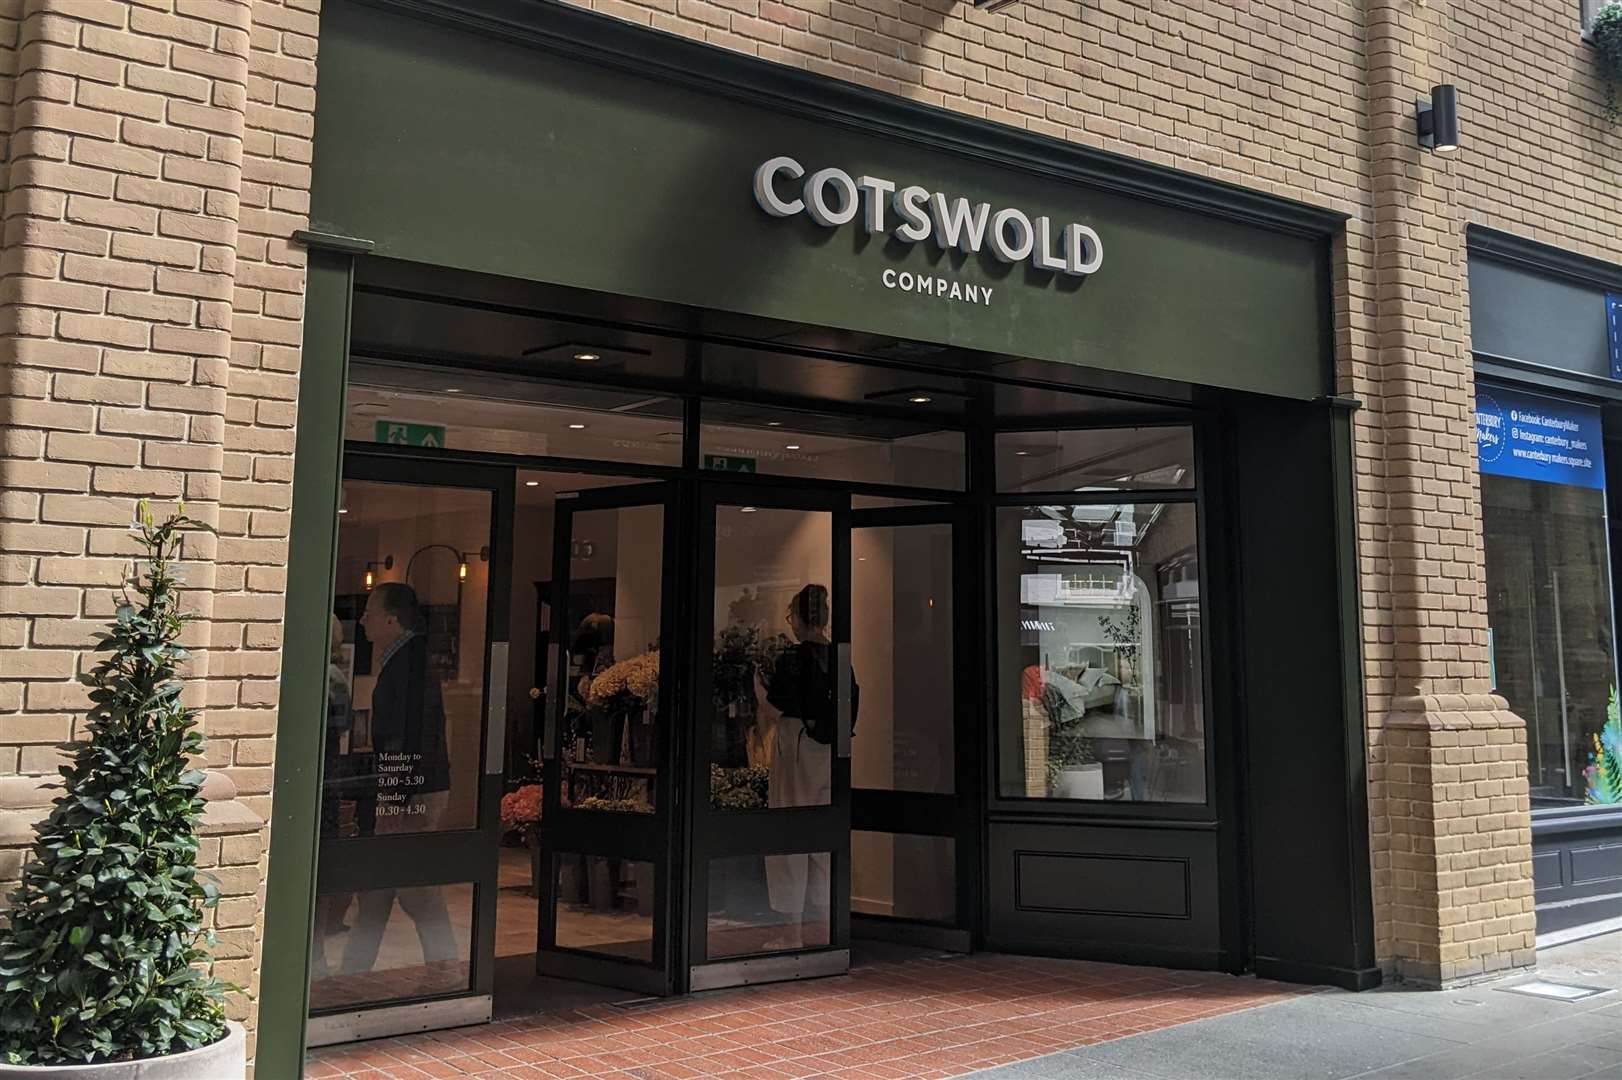 The Cotswold Company's new store in Canterbury's Marlowe Arcade - previously home to HMV